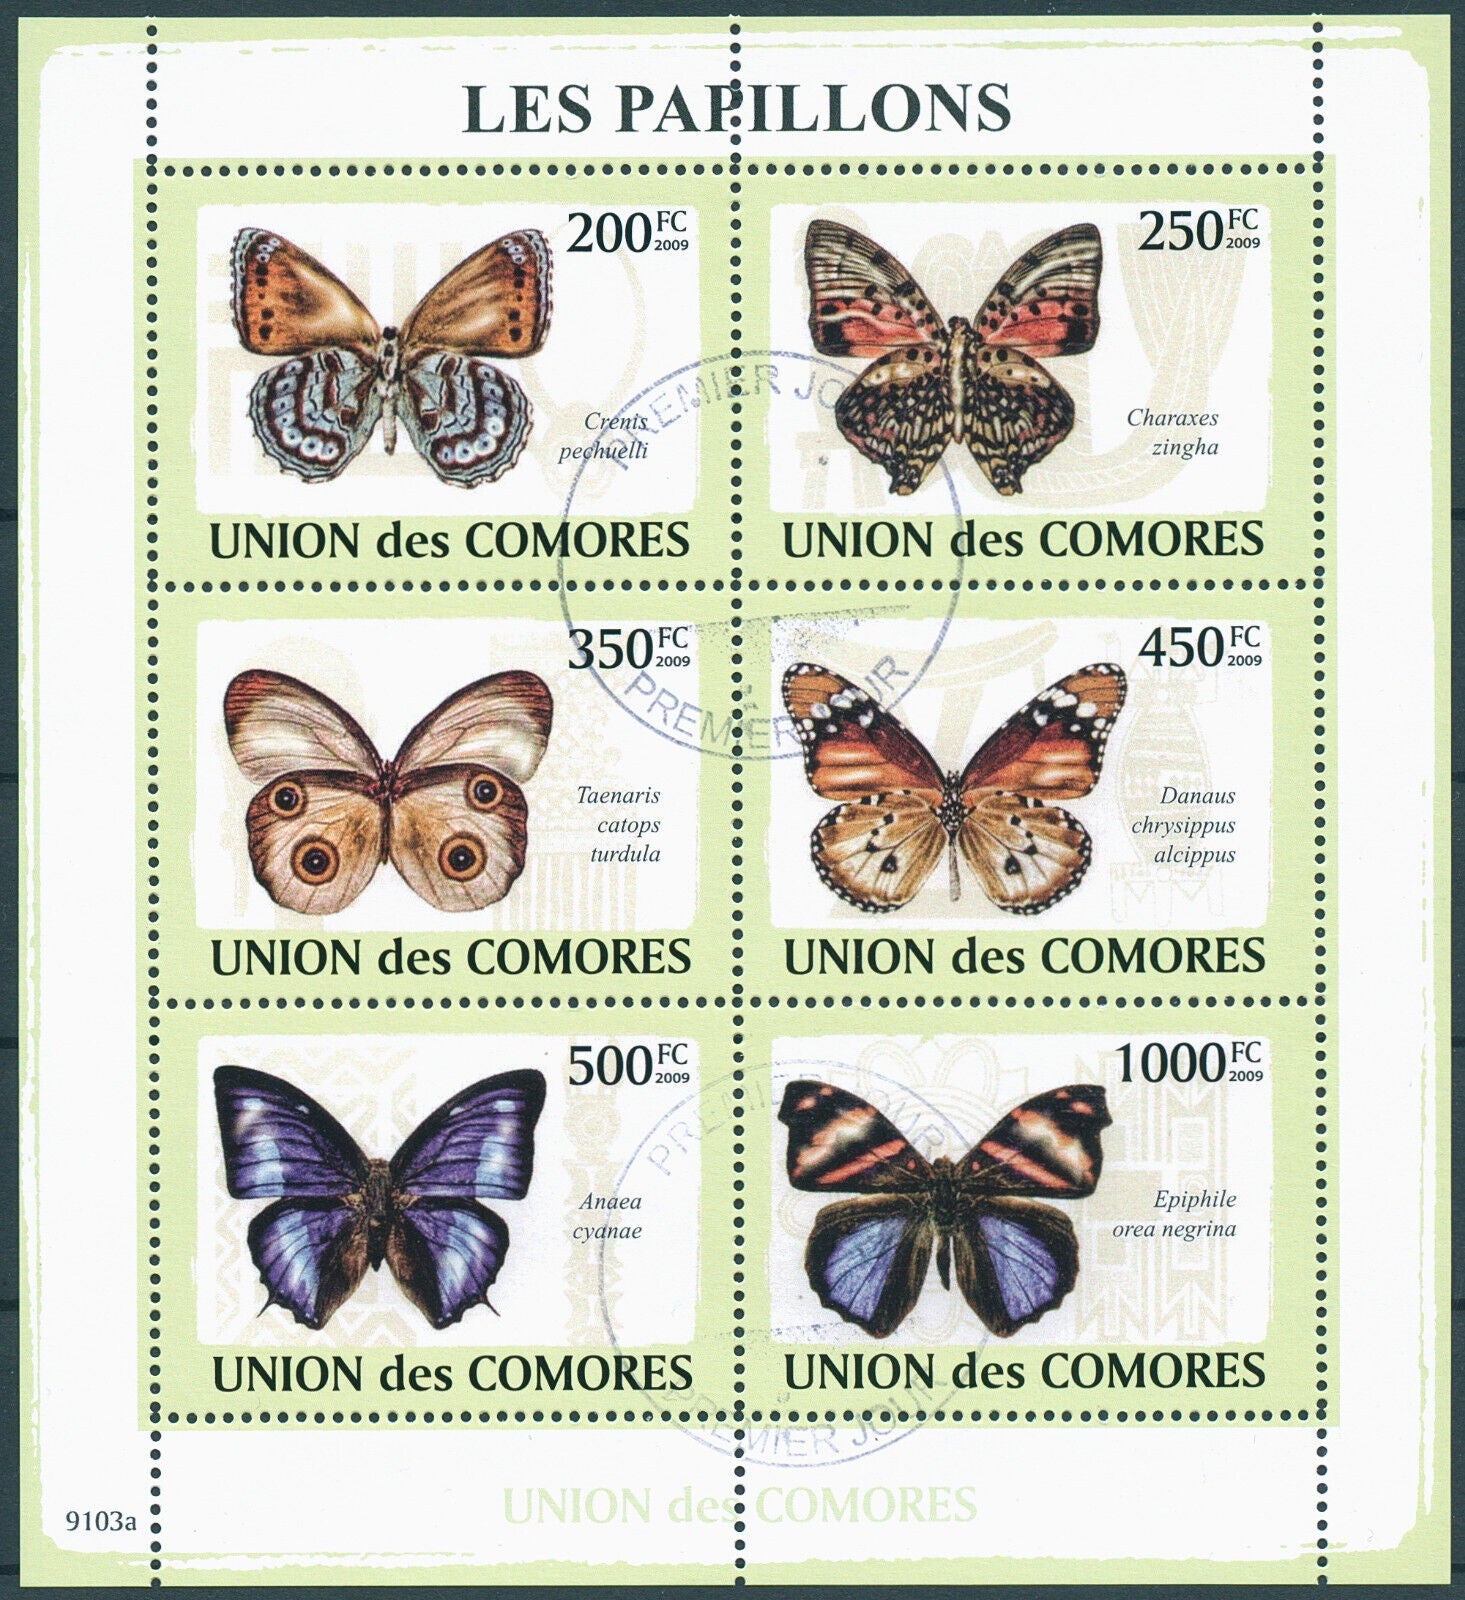 Comoros 2009 CTO Butterflies Stamps Red Charaxes Plain Tiger Butterfly 5v M/S